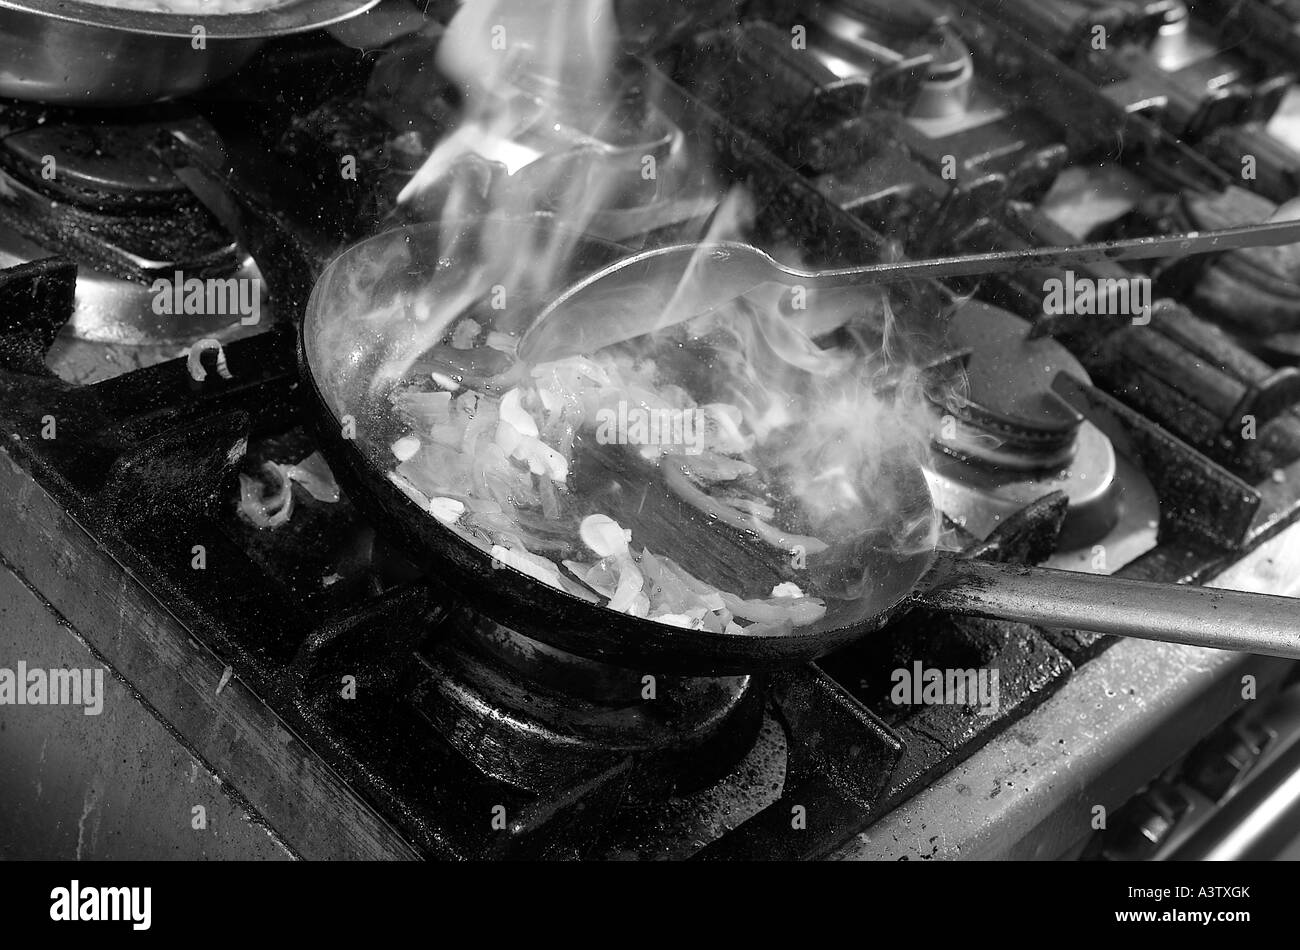 Close up of chef cooking in industrial kitchen adding spice and flames Stock Photo